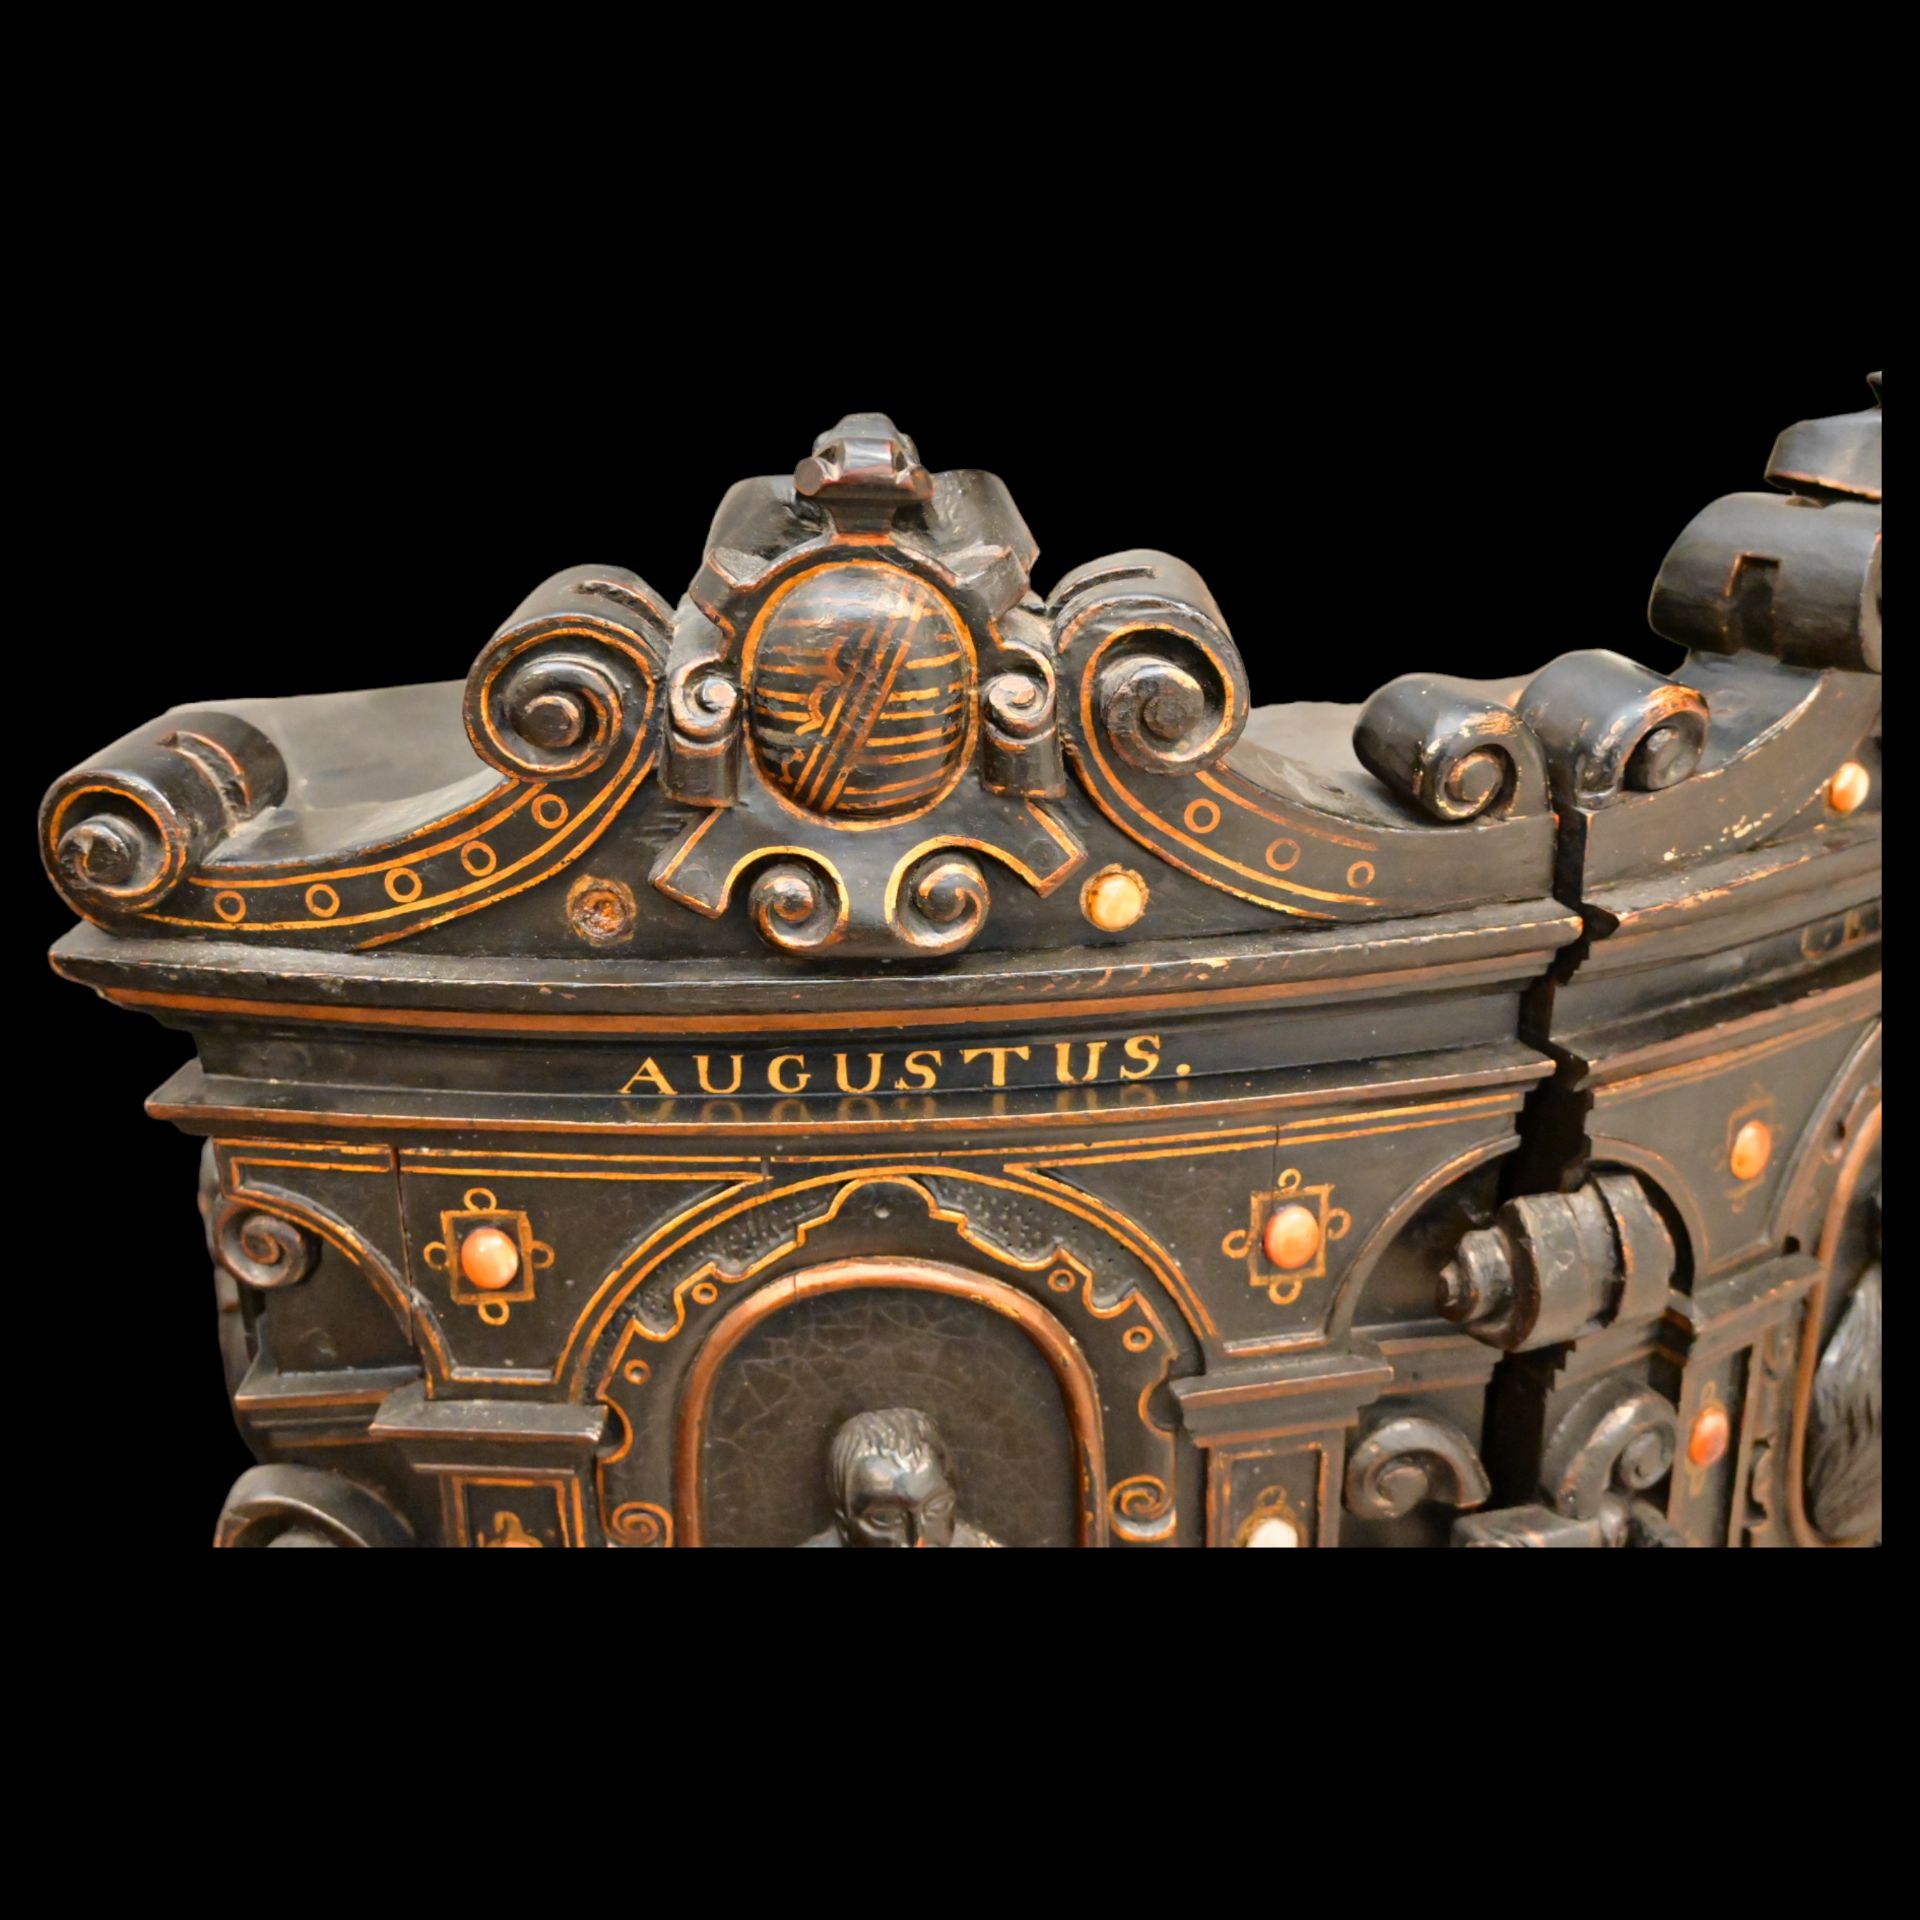 Extra rare 17th Century Carved Cabinet for relics from the castle in Dresden, Saxony, Germany. - Image 17 of 21